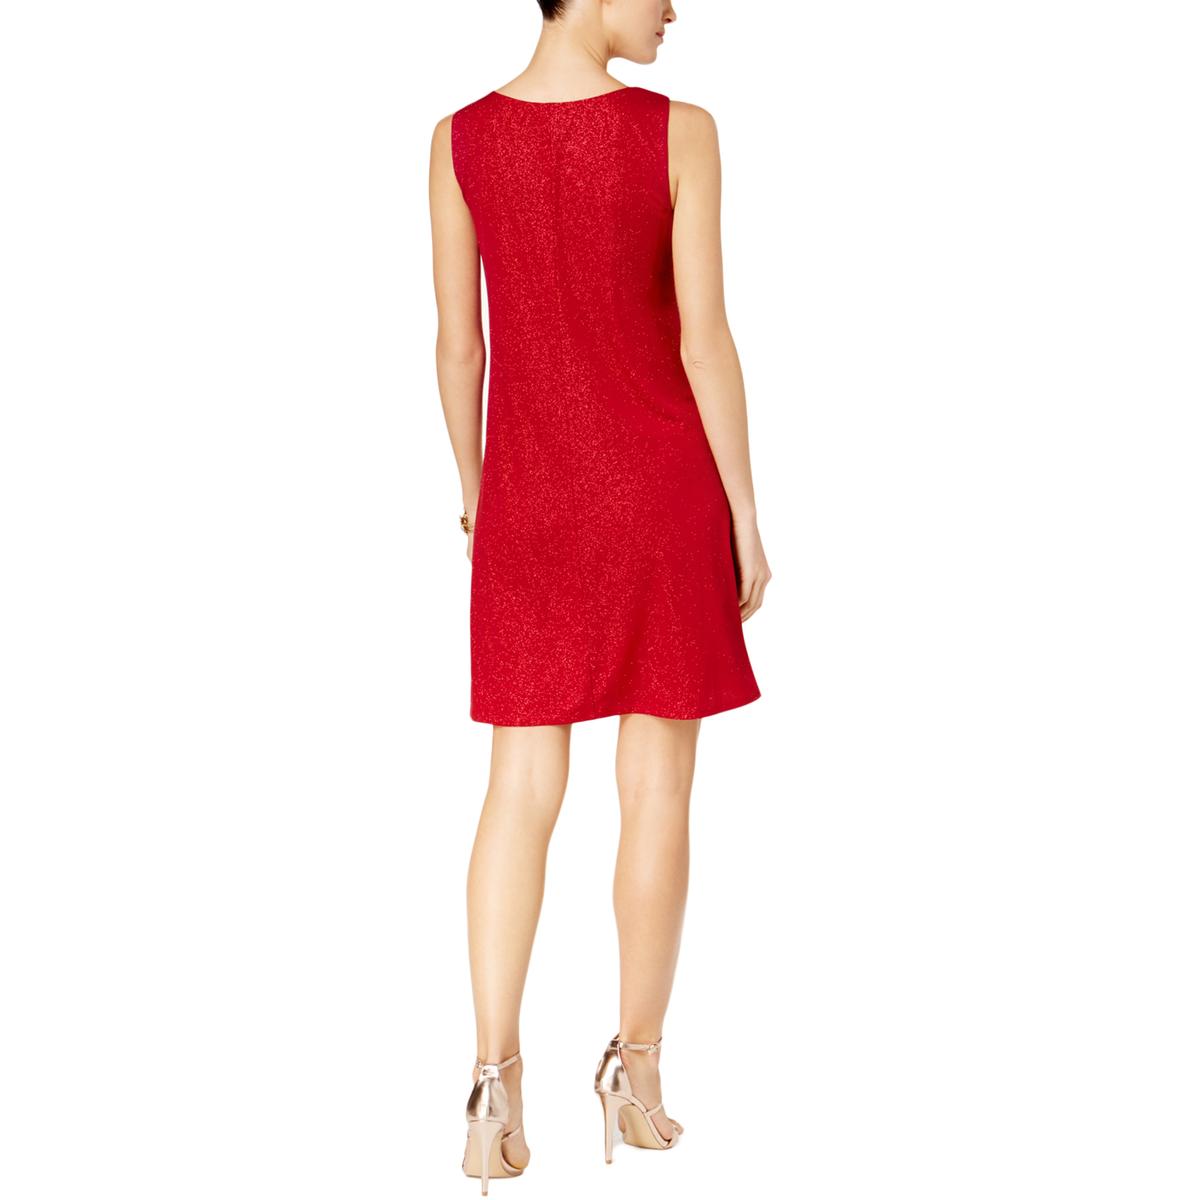 MSK Womens Red Embellished Shift Party Cocktail Dress Gown XL BHFO 5025 ...